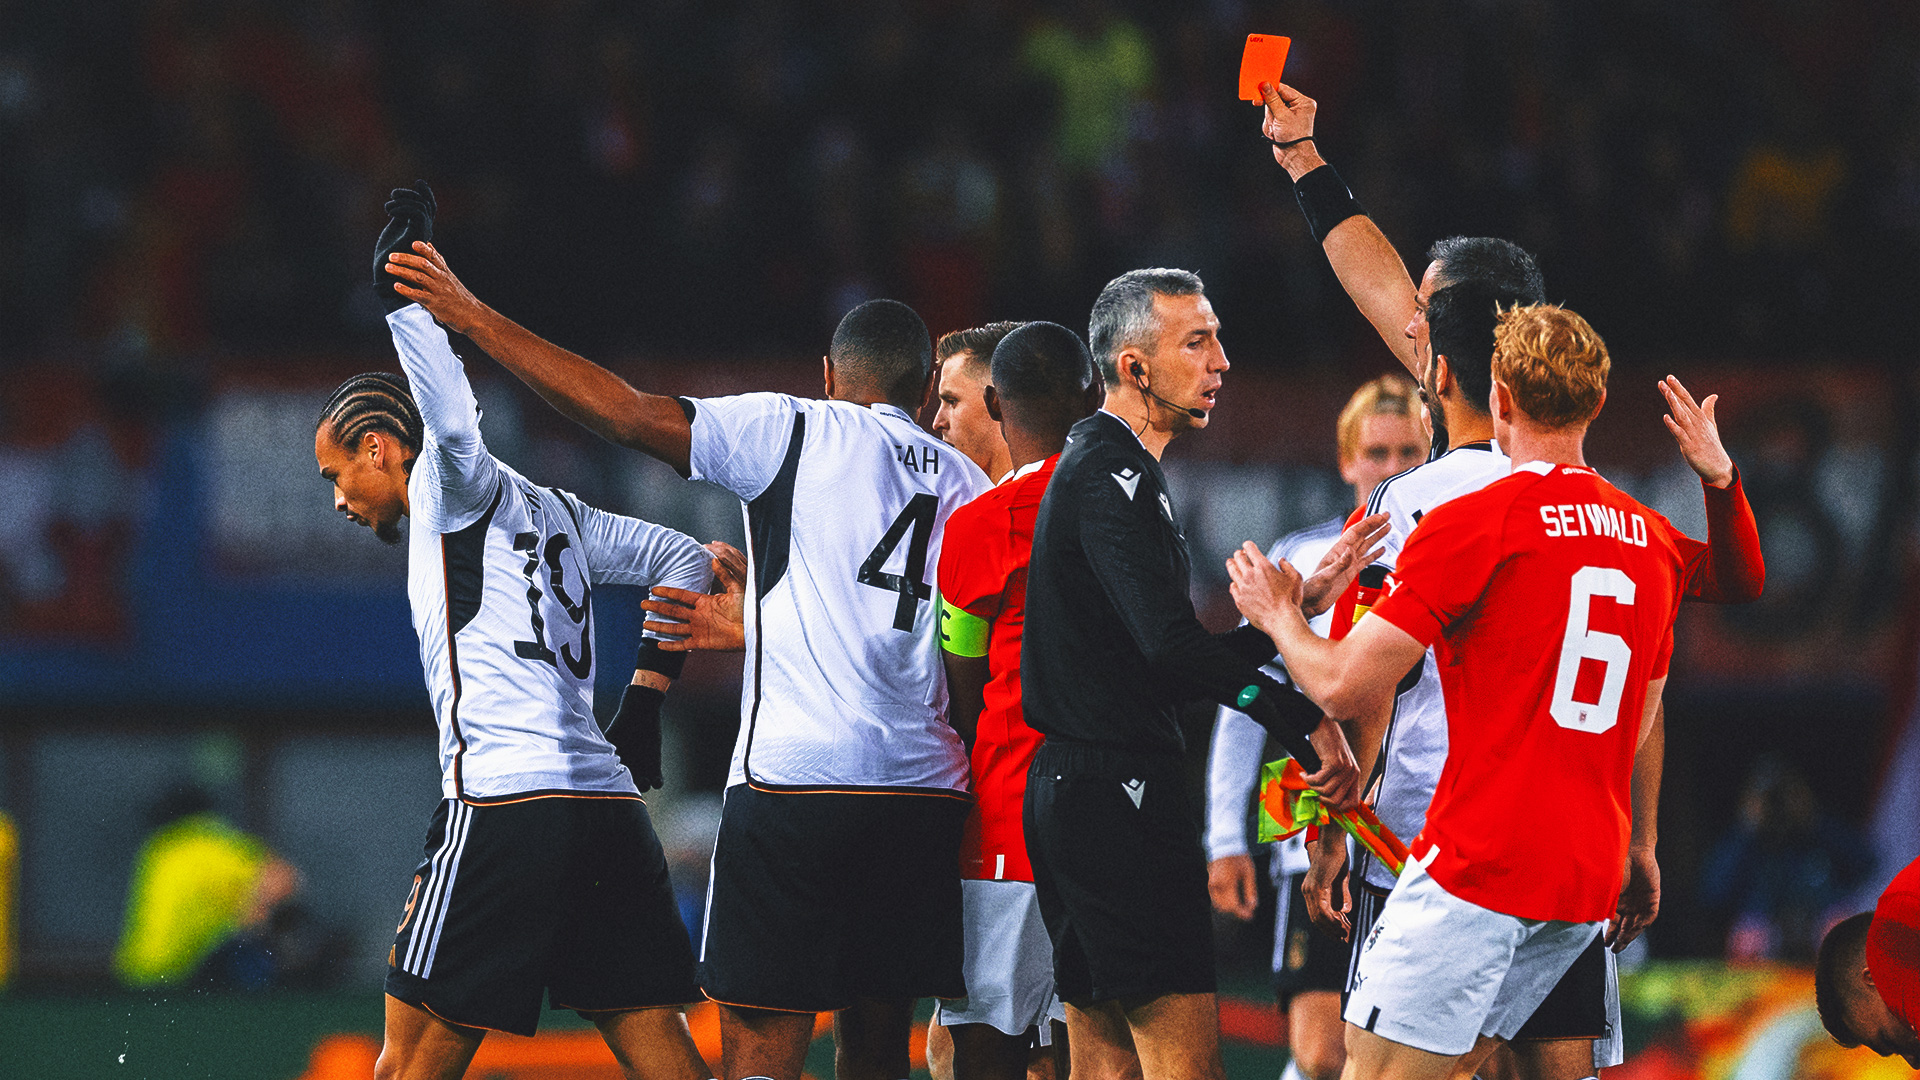 Leroy Sané sent off as Germany’s troubles deepen in 2-0 loss to Austria